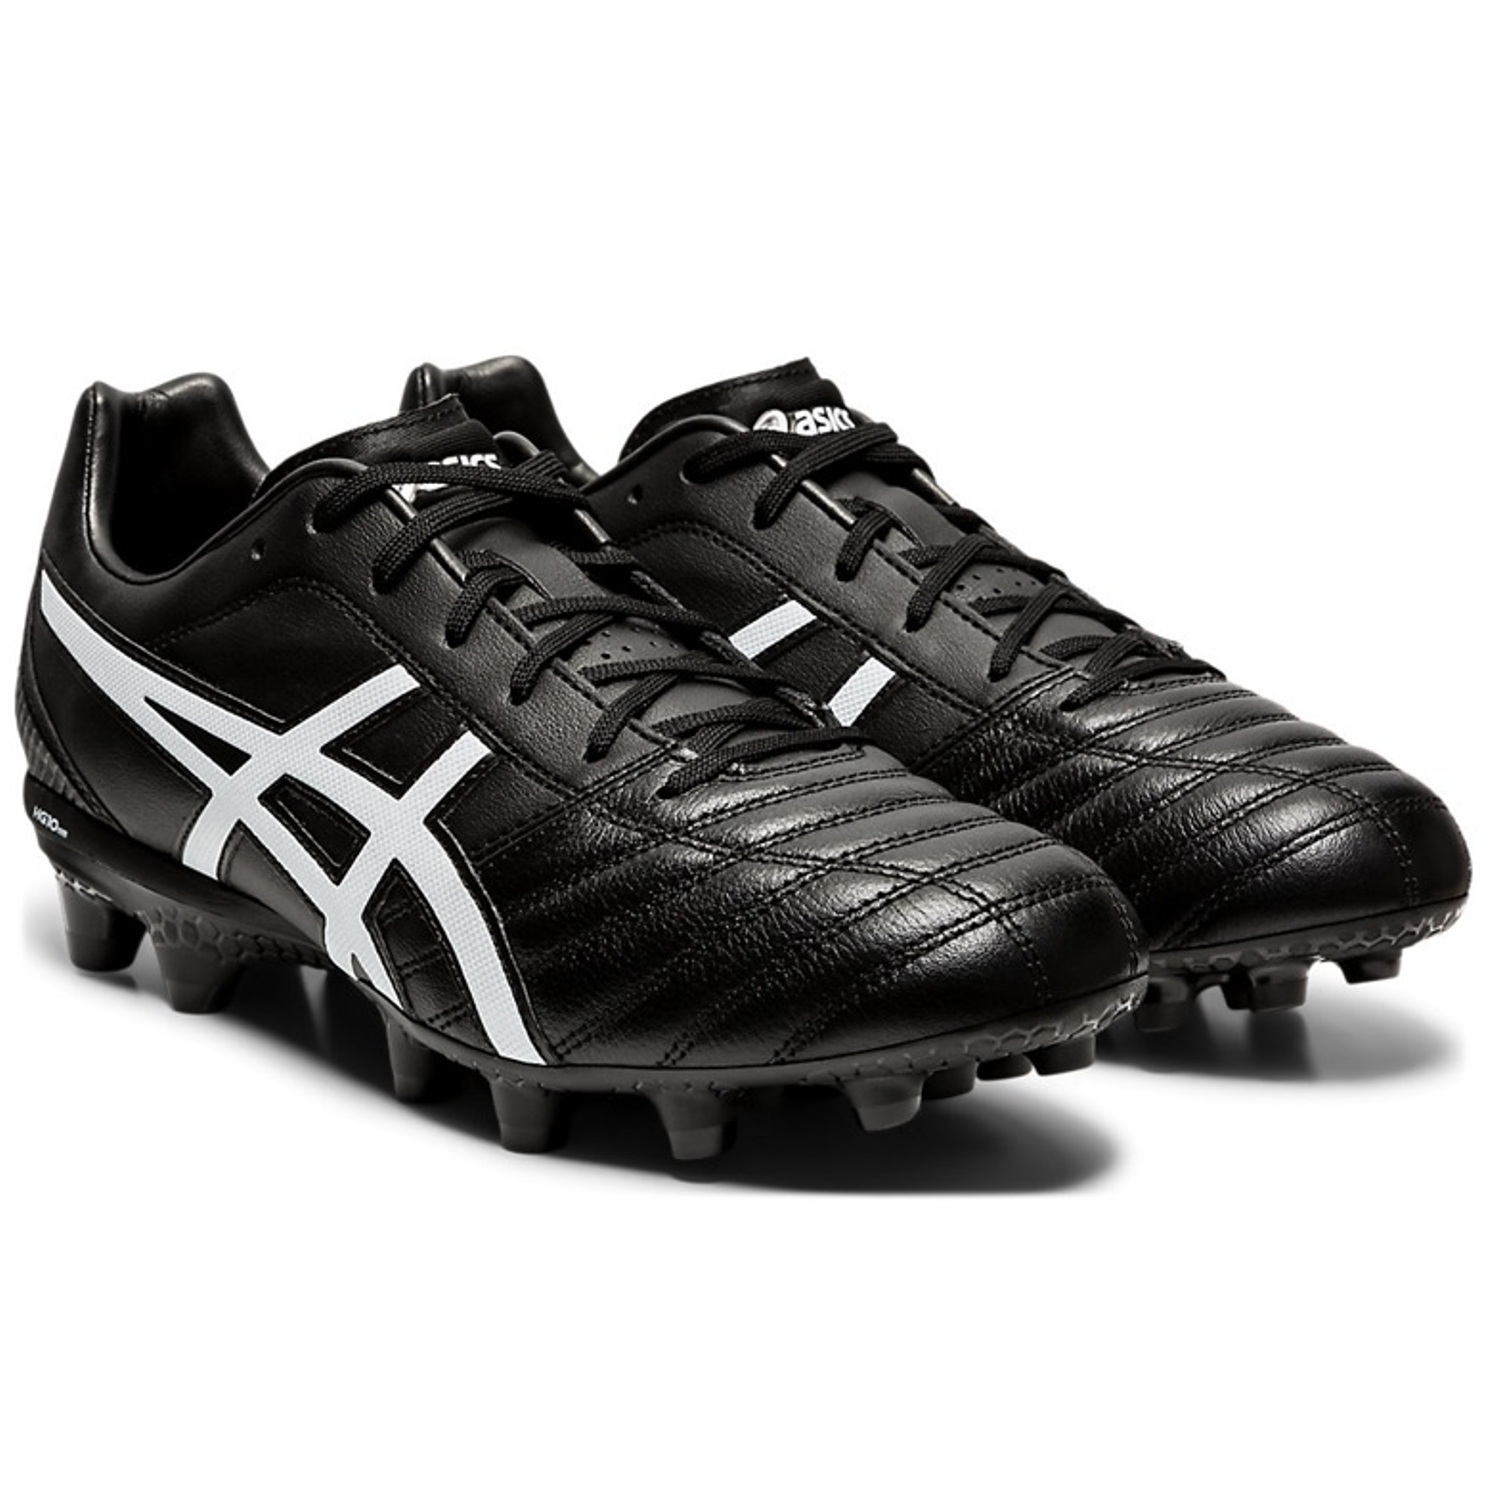 asic footy boots